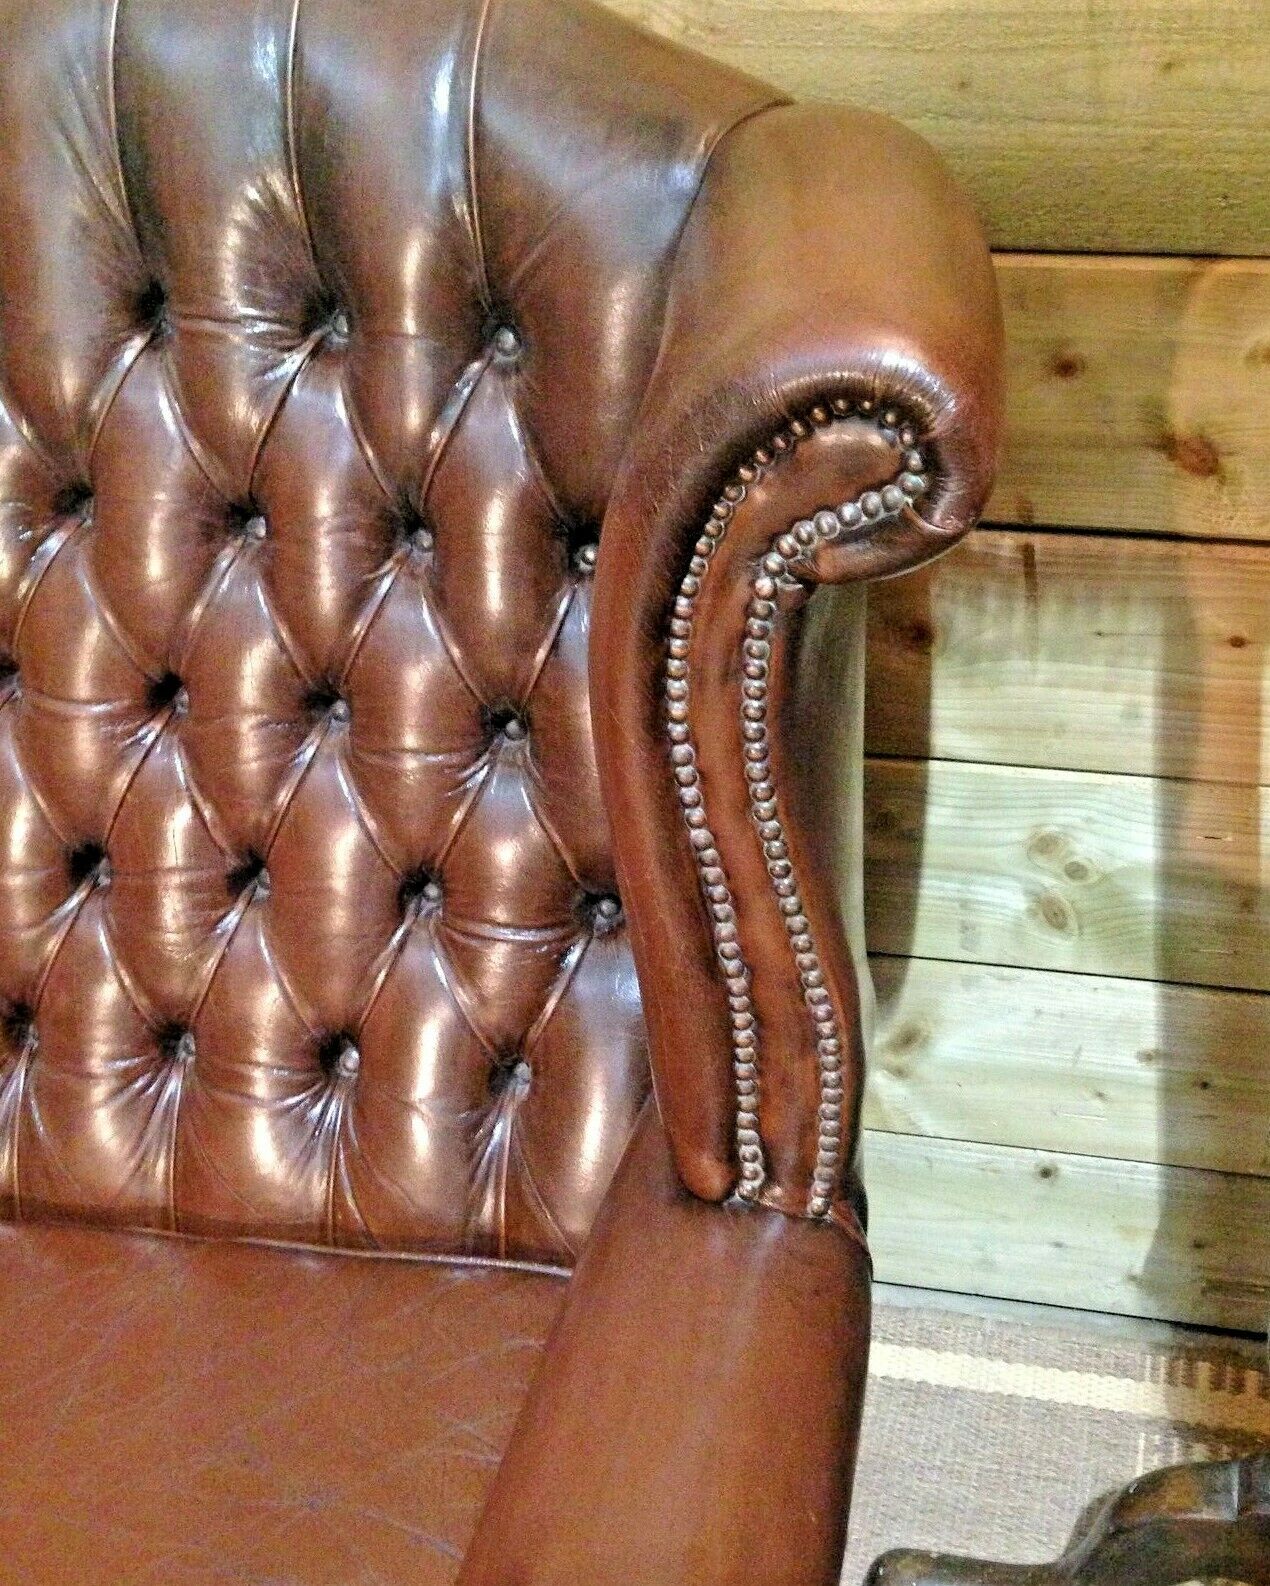 Vintage Leather Chesterfield Style Sofa / High Back Sofa